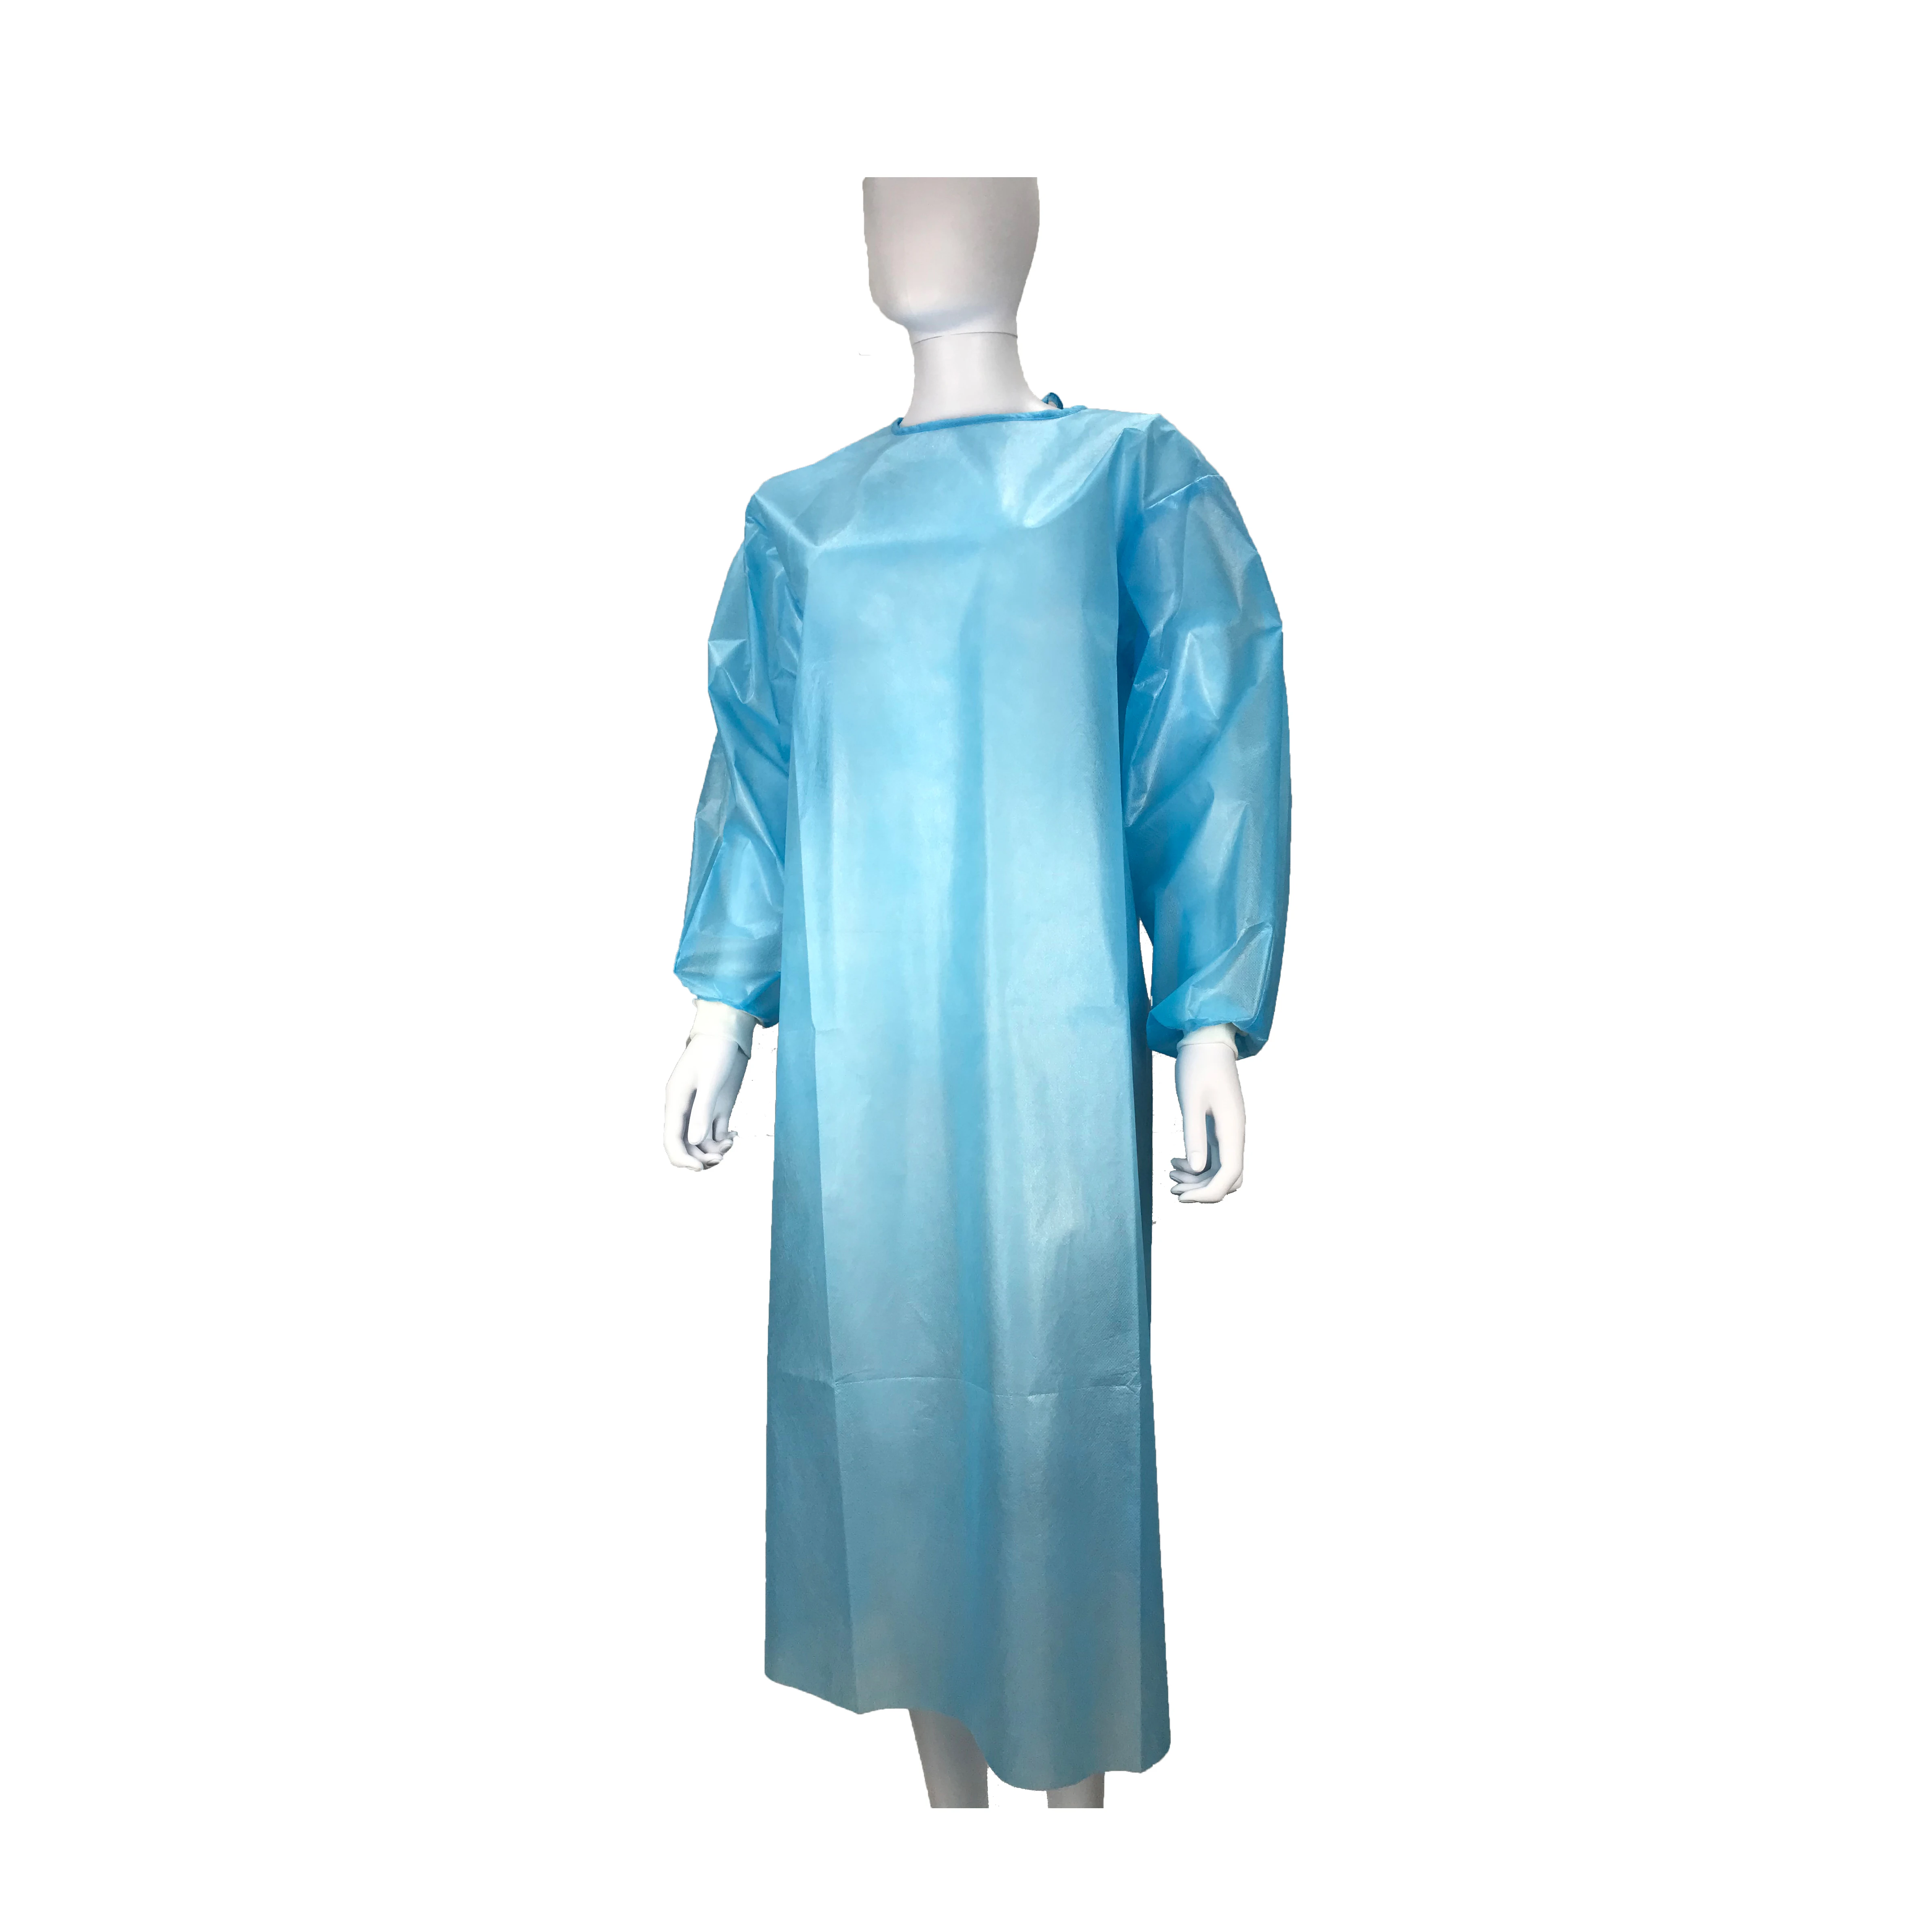 AAMI LEVEL 1 ppe isolation gown disposable isolation gowns waterproof level 1 isolation gown white cuff